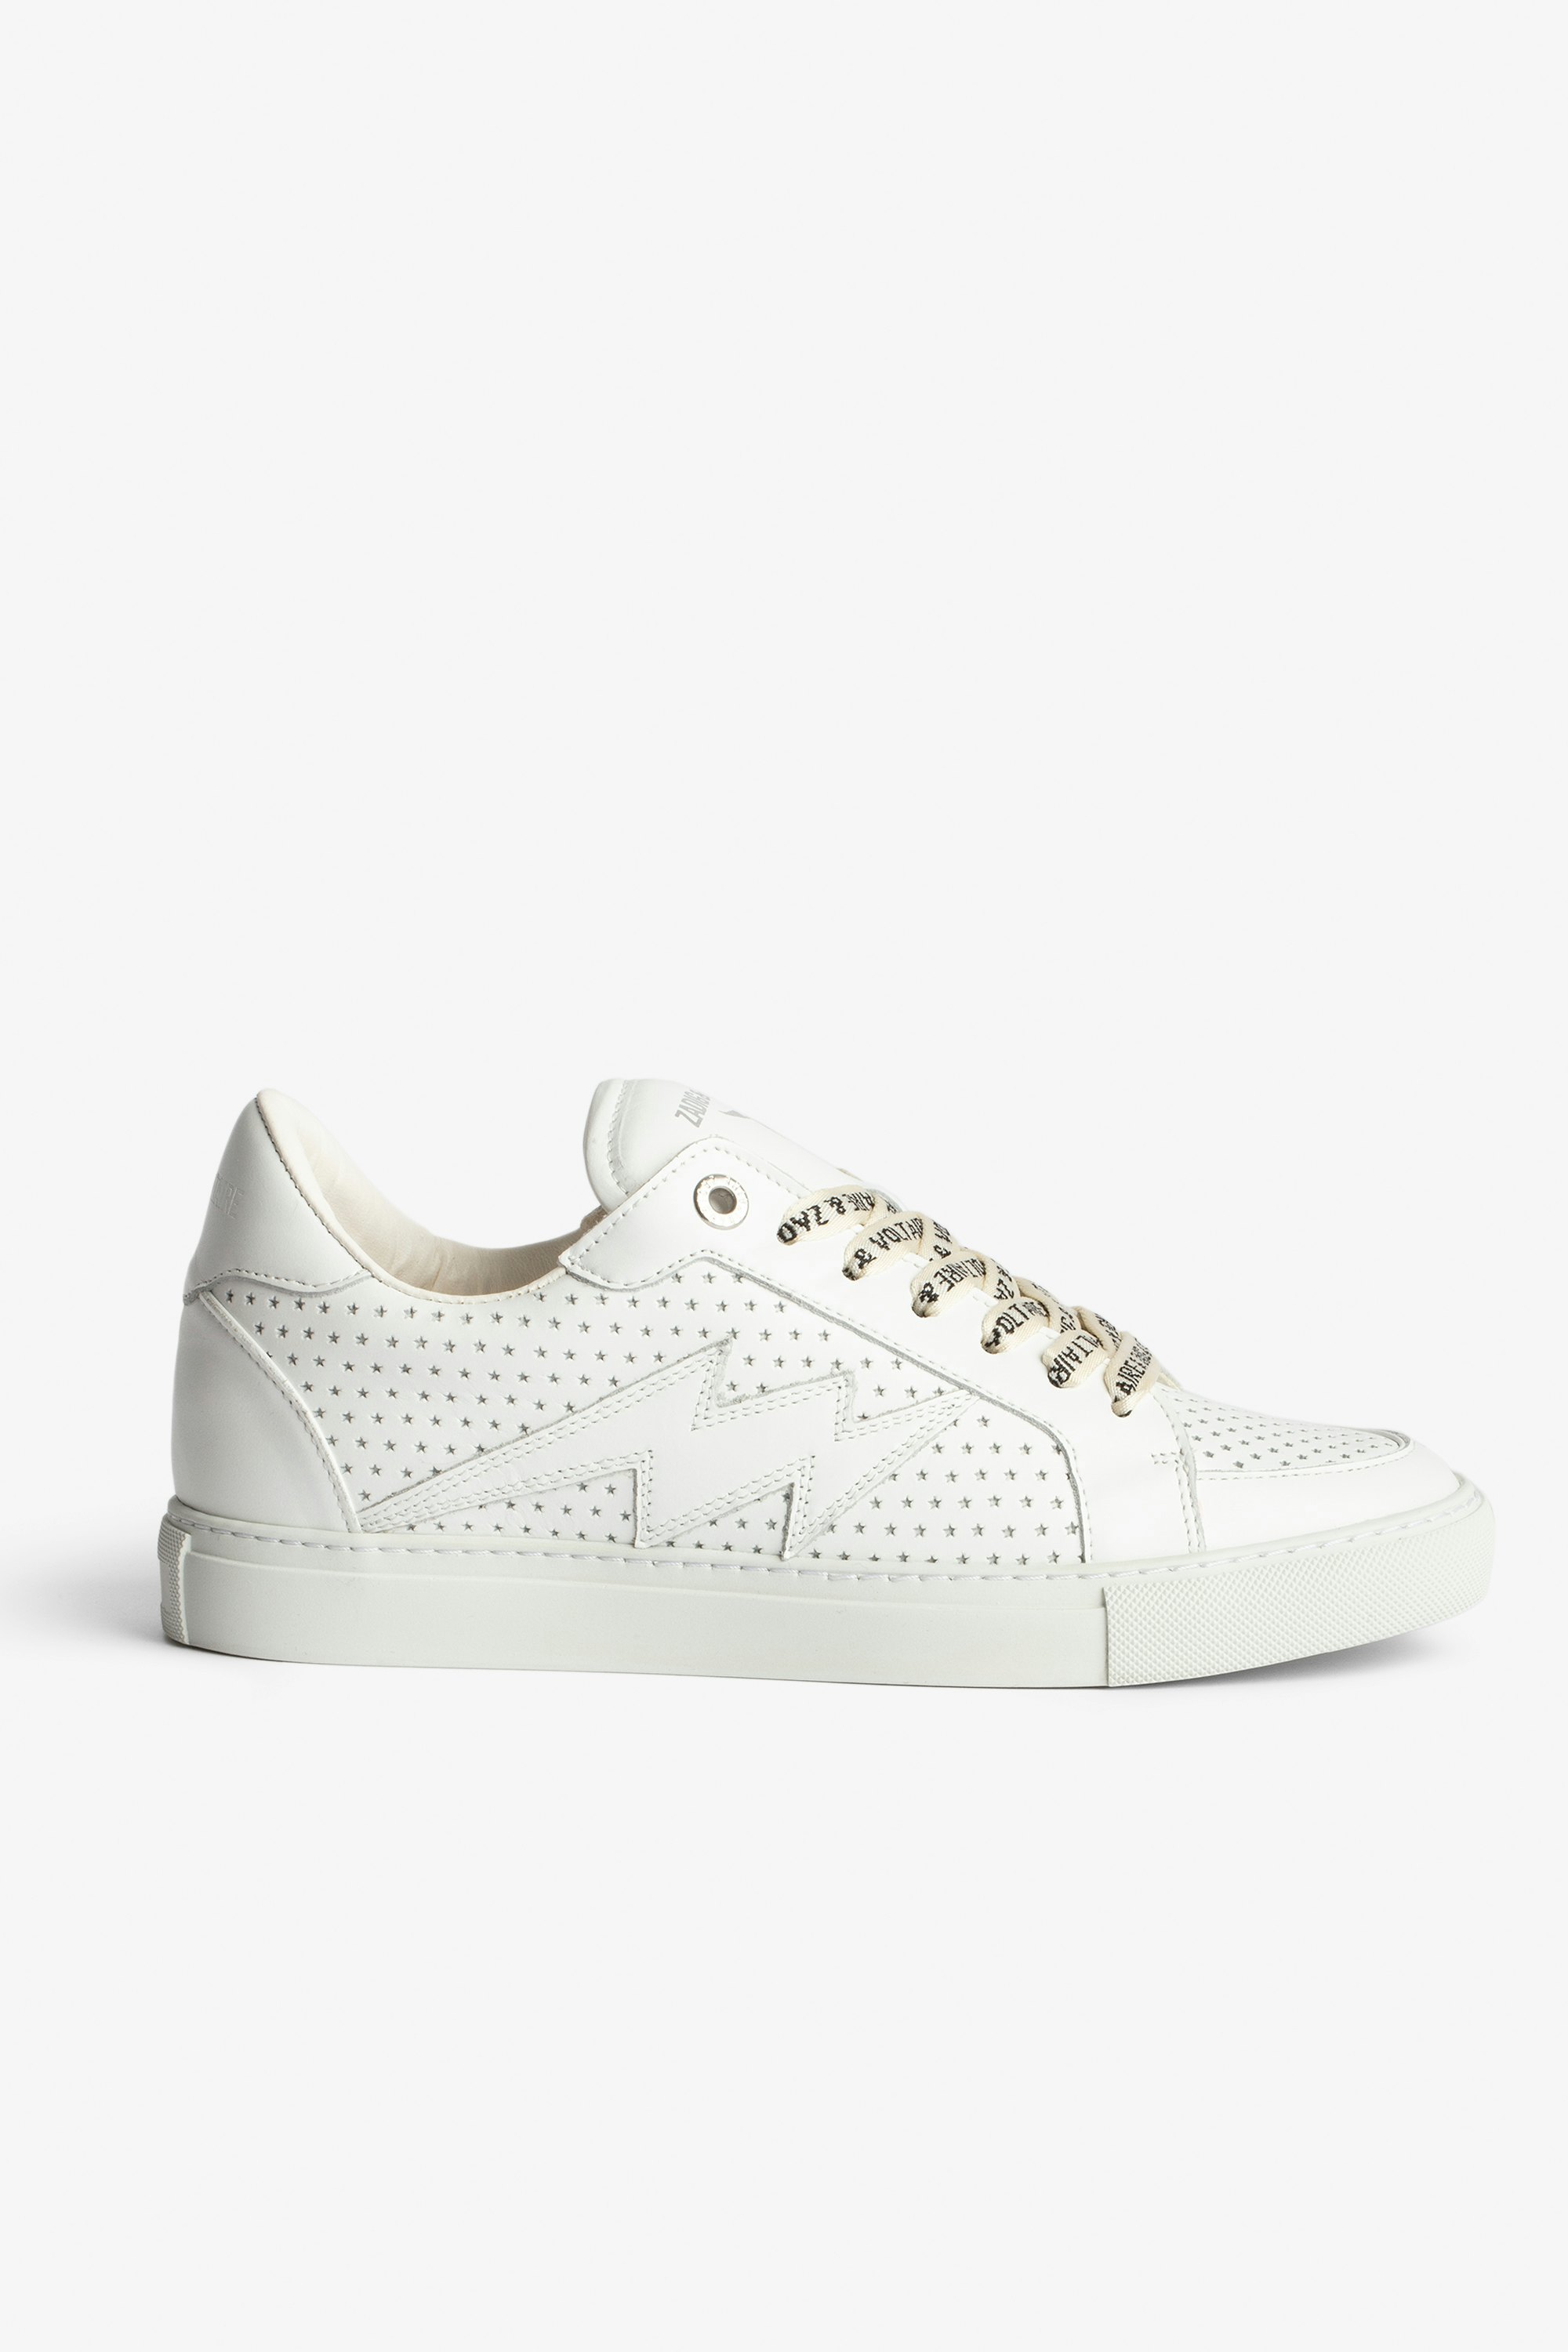 La Flash Trainers - Women's low-top trainers in smooth white leather with perforated stars.